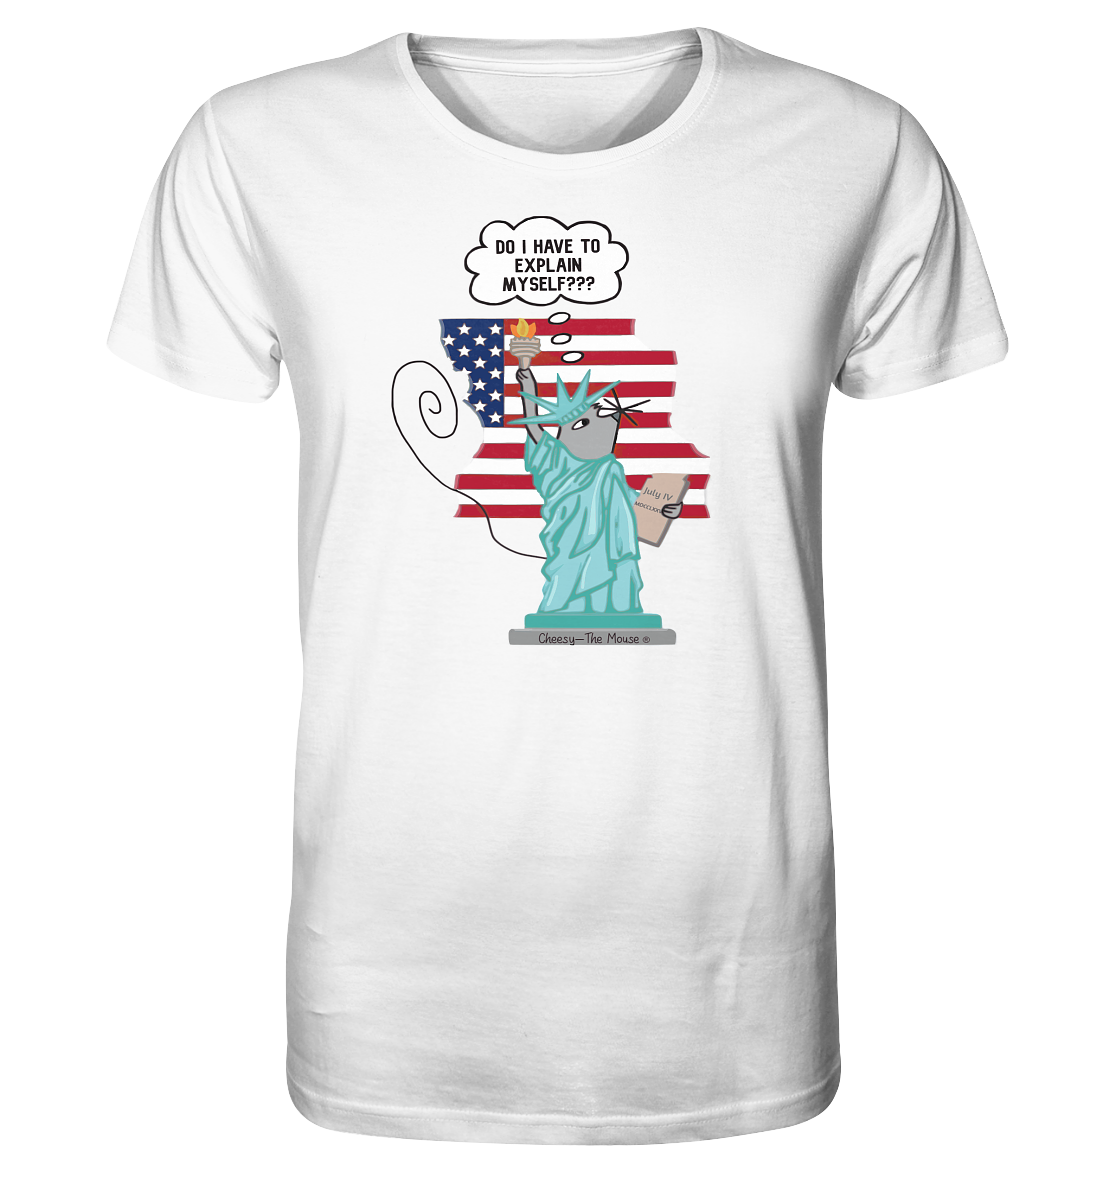 Cheesy The Mouse goes America - Organic Shirt